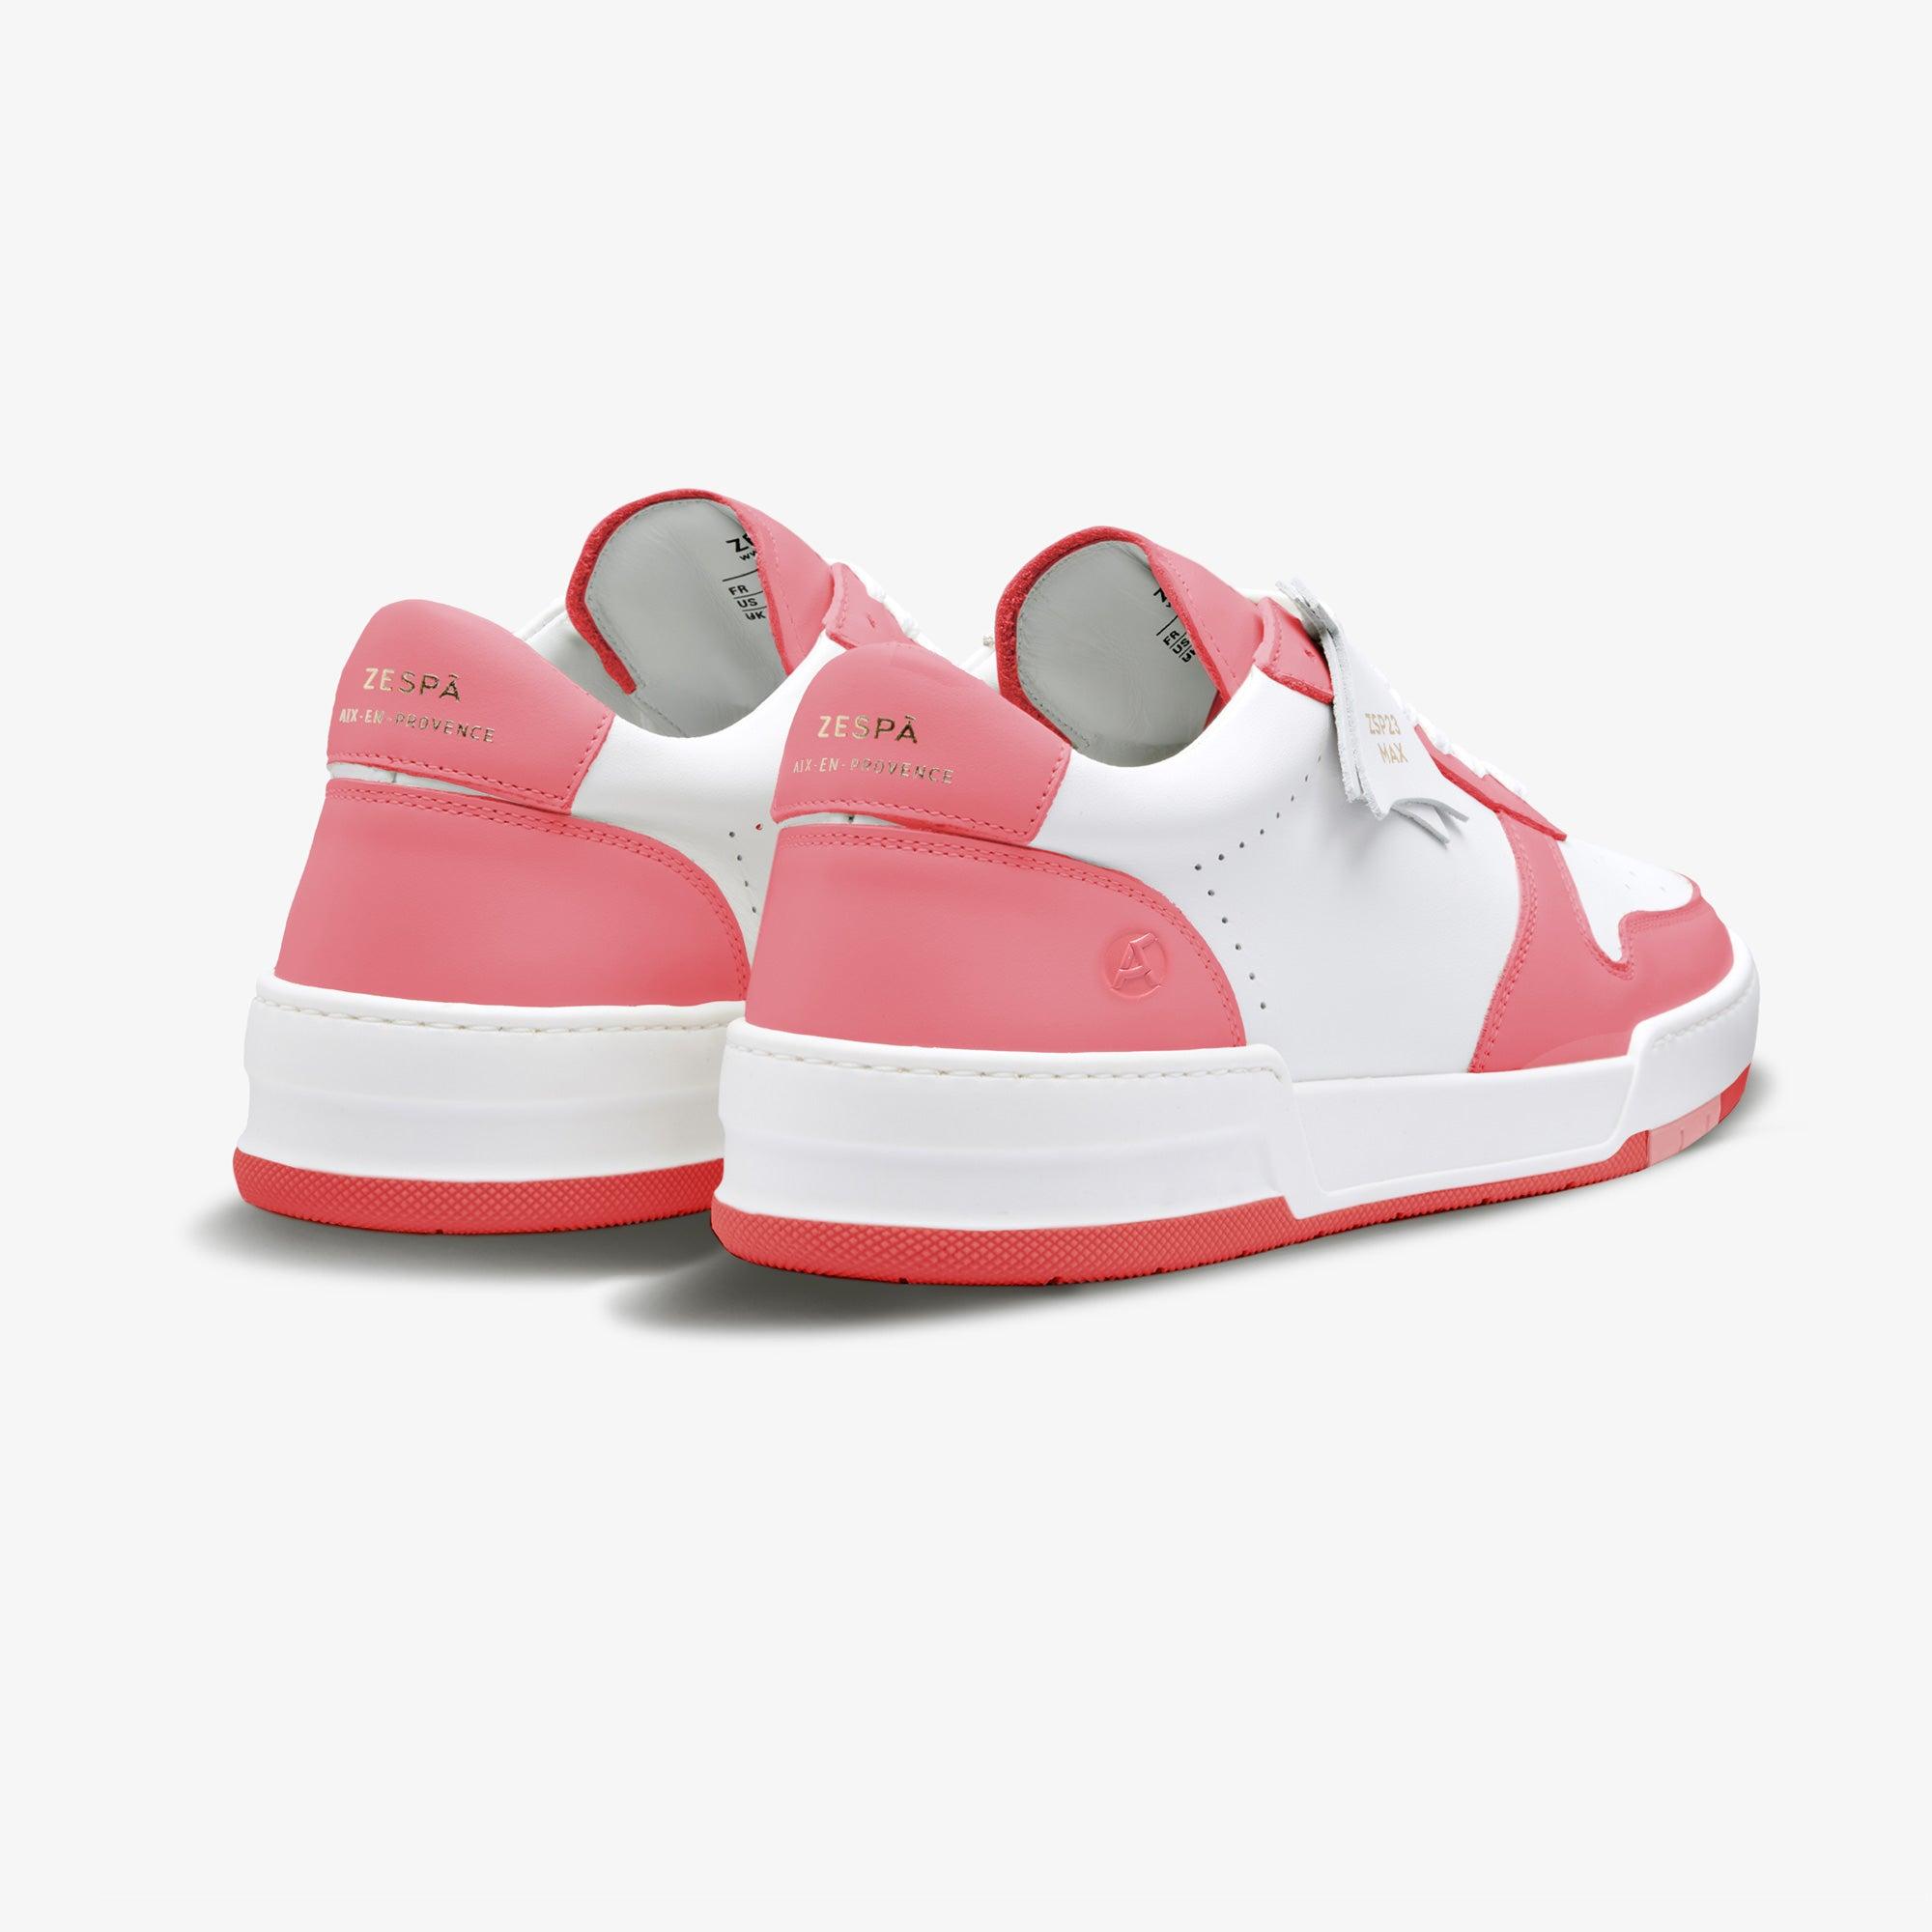 Zespà Zsp23 Max Nappa Bicolor Indian Pink | Lyst